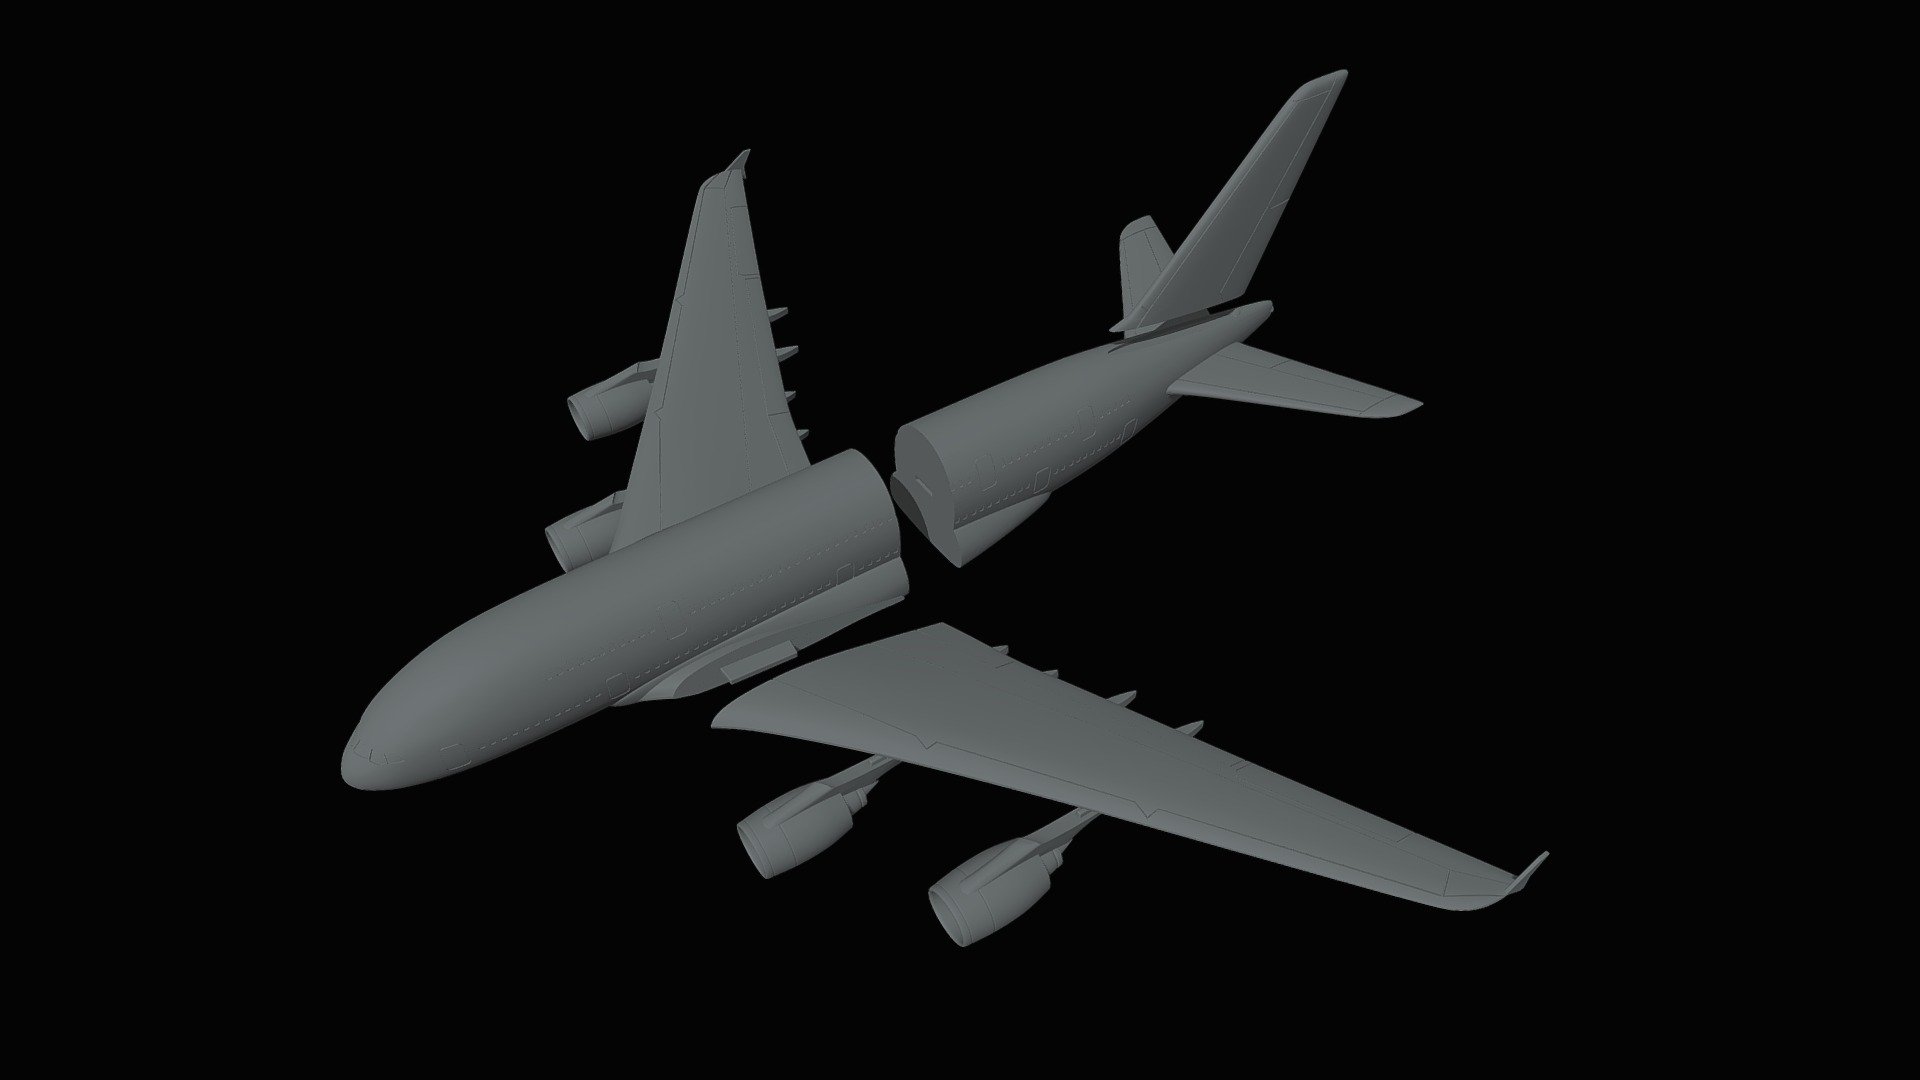 If you are interested to buy this model, you can purchase it here:

https://cults3d.com/en/users/veetrapro/3d-models - AIRBUS A-380 SCALE 1:200 PRINTABLES STL FILES - 3D model by veetrapro 3d model